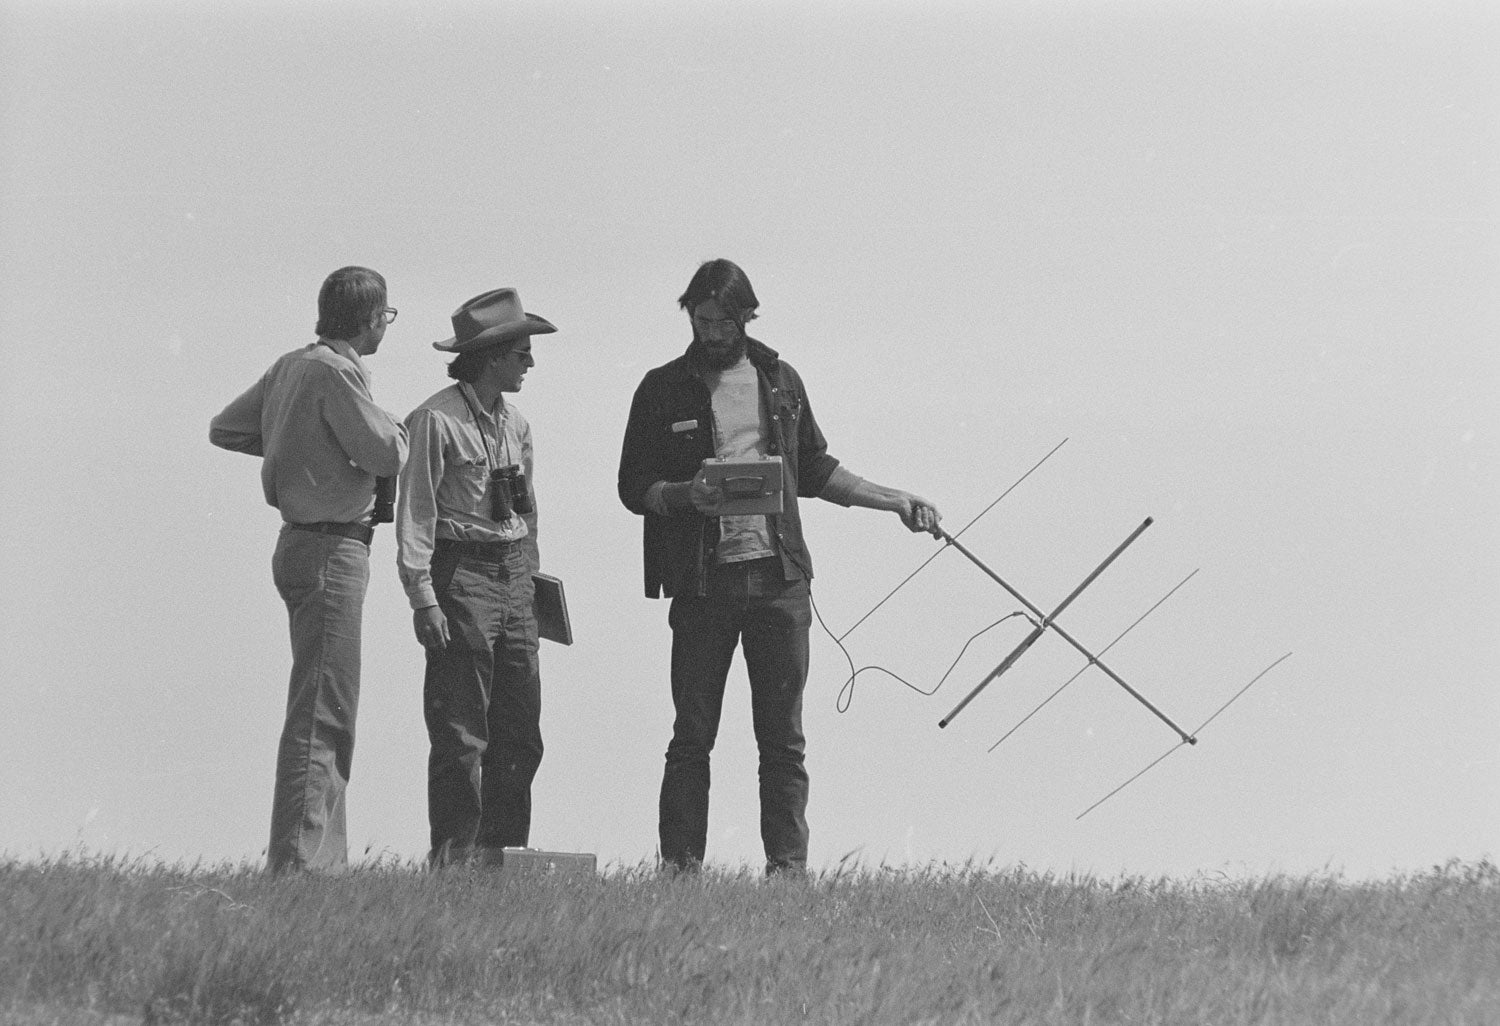 a black and white photo shows three men. One is holding an antenna and has long brown hair and a beard styled in a 1970s fashion. the second man has a large cowboy hat and aviator sunglasses. The third man has long 1970s style hair and large-lensed glasses